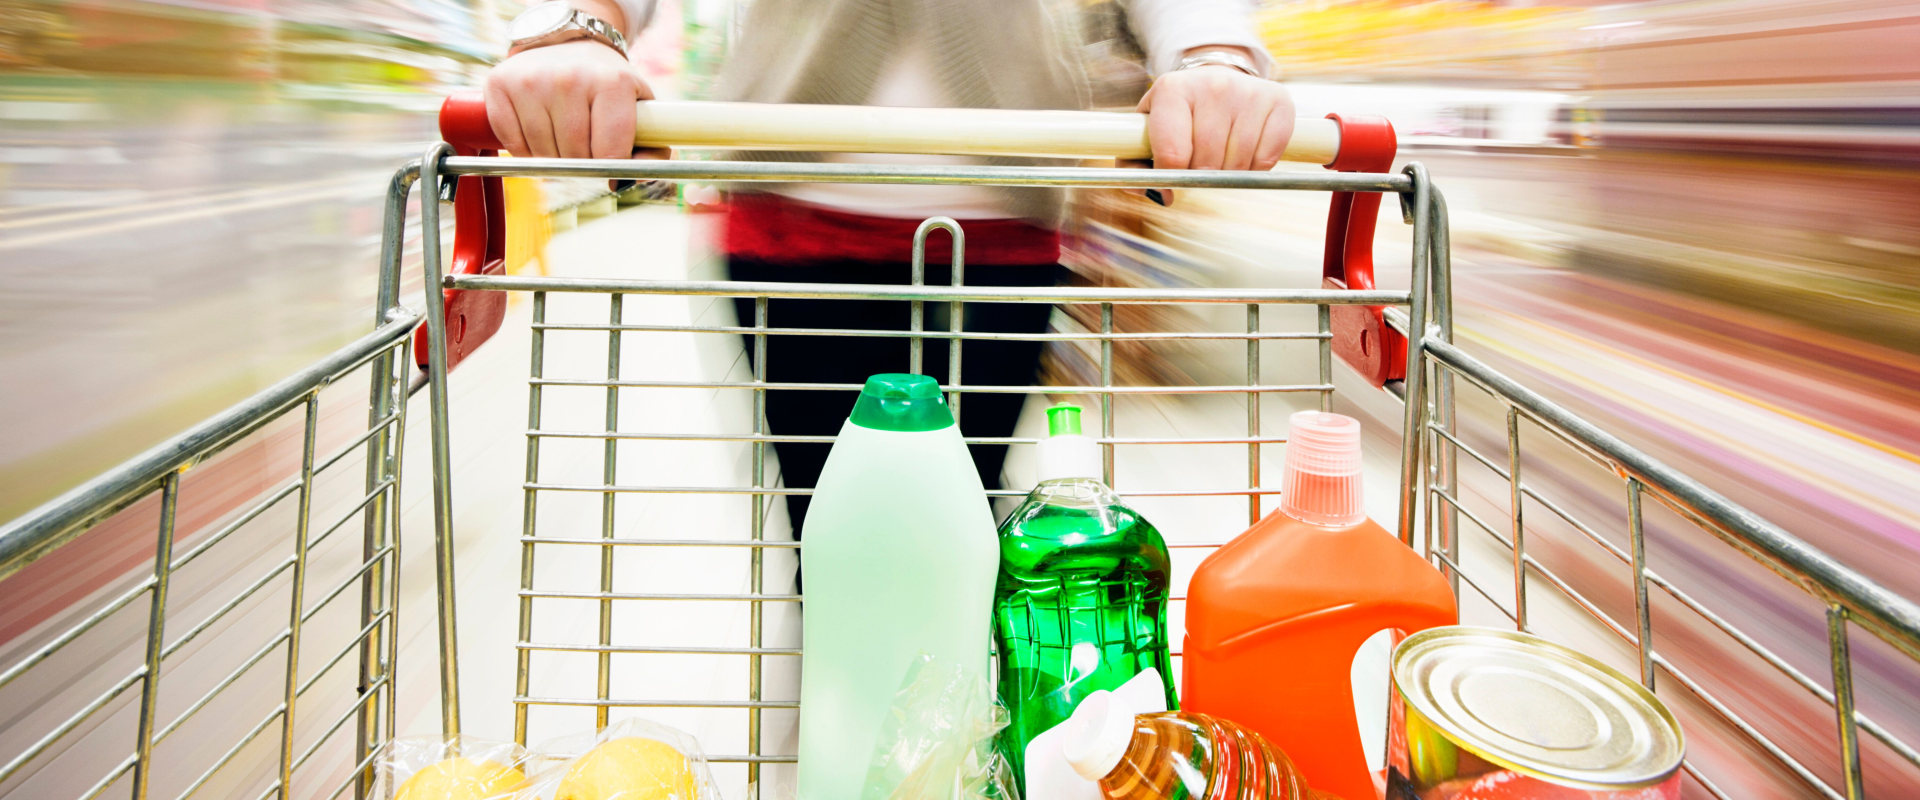 How do you deal with grocery store anxiety?